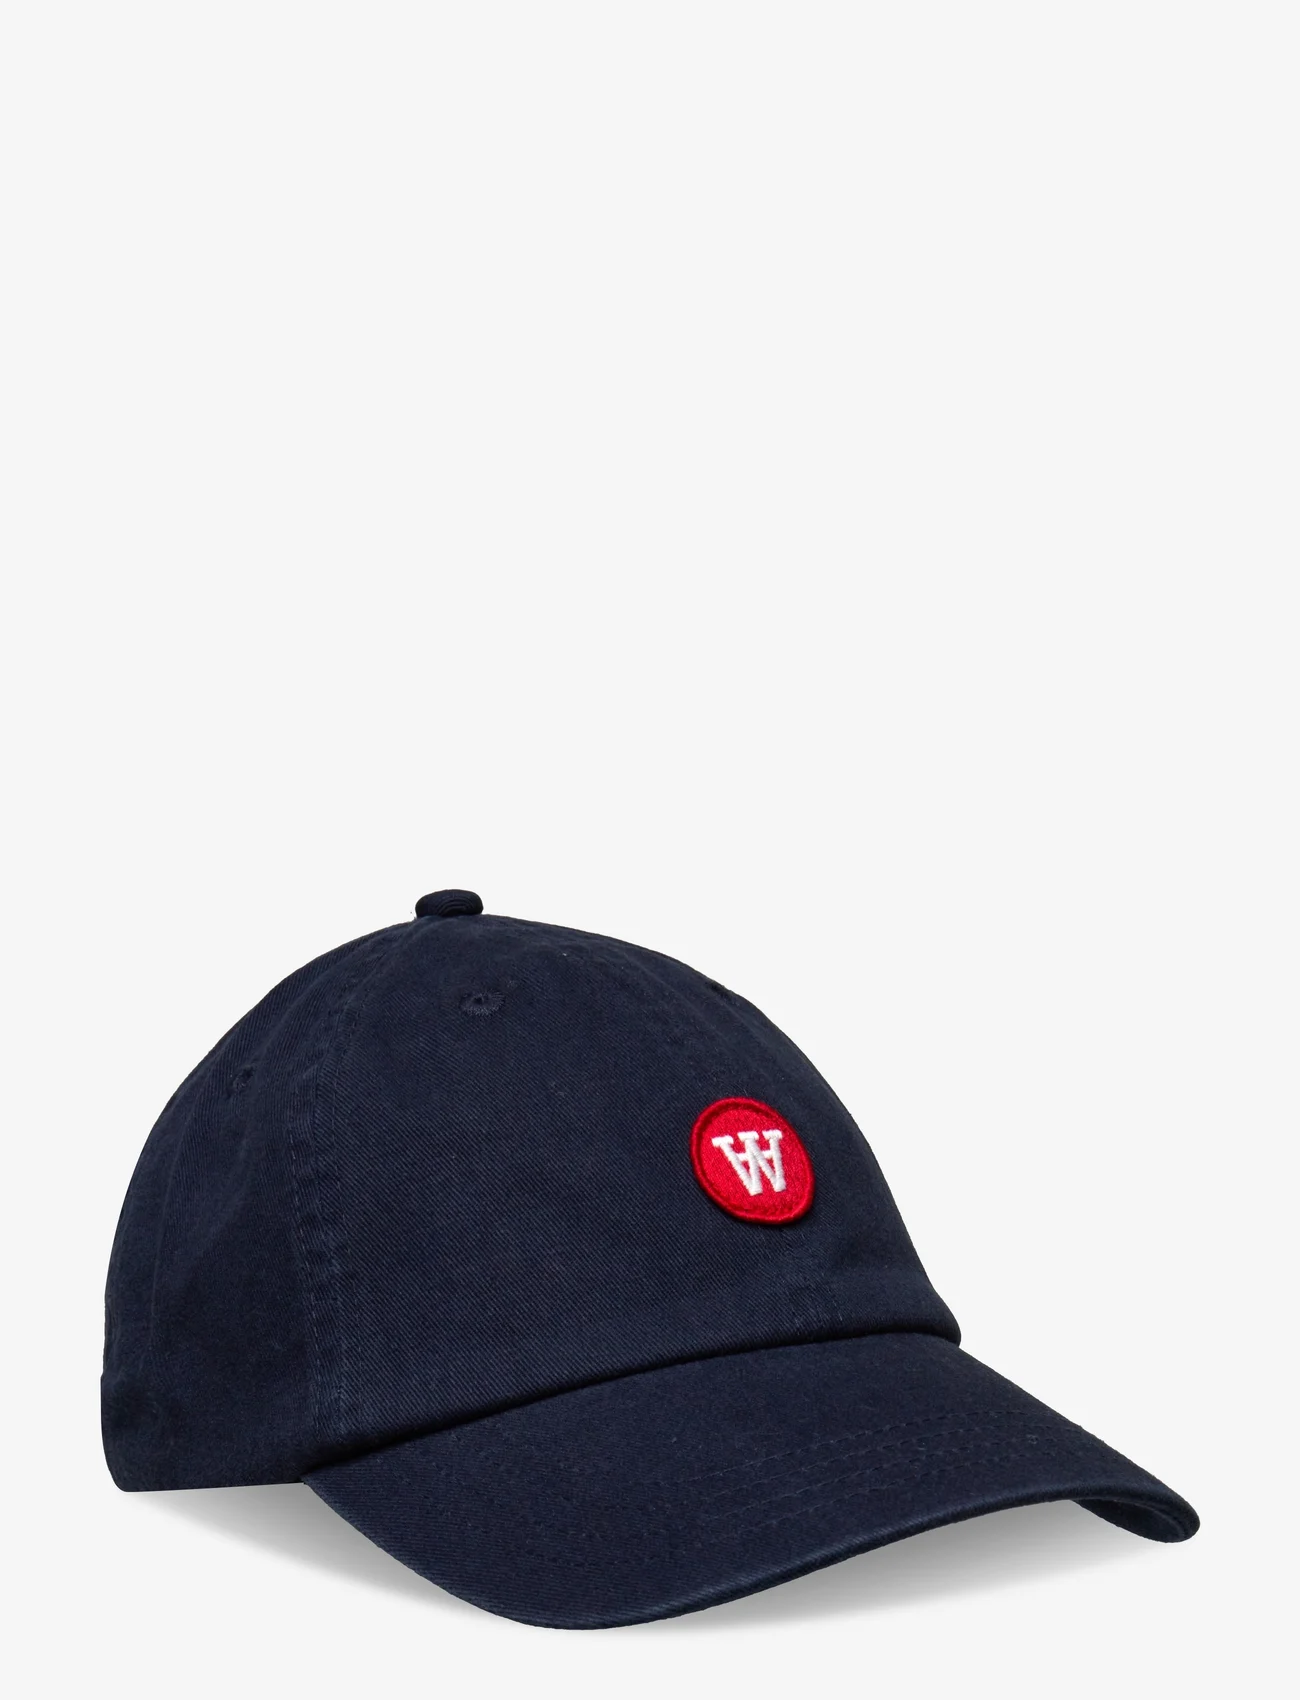 Double A by Wood Wood - Eli patch cap - caps - navy - 0